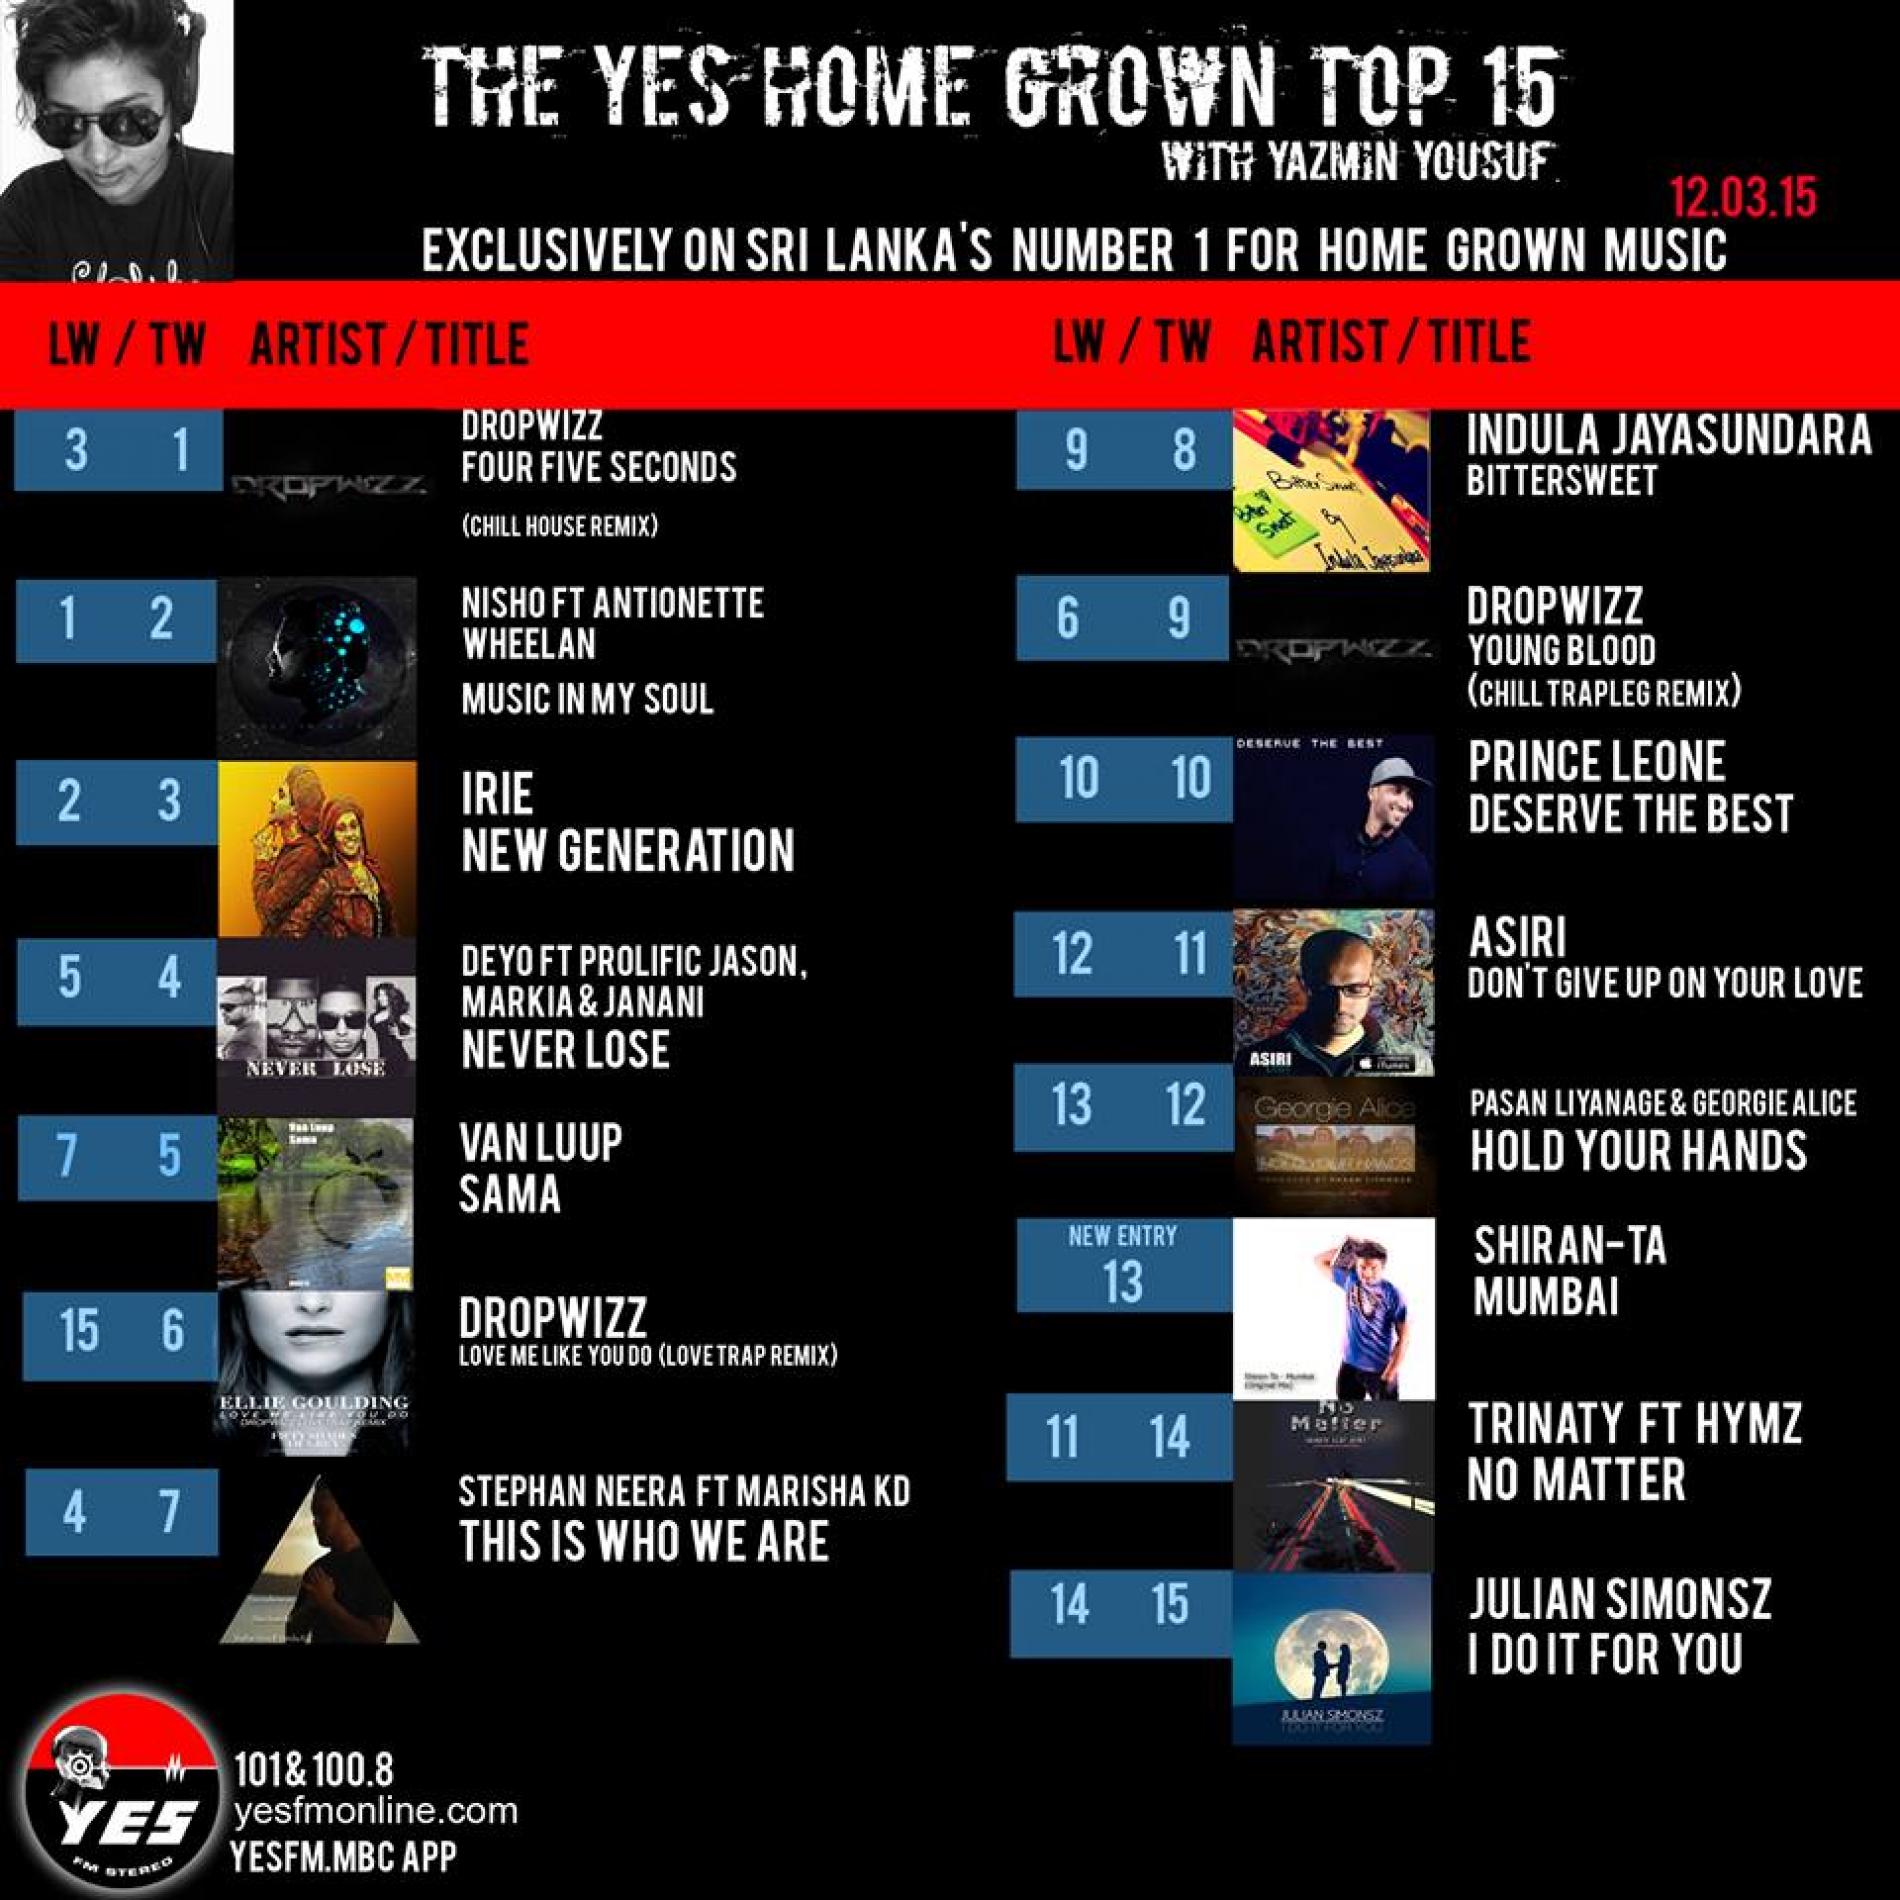 Congratz To Dropwizz On Another Number 1!